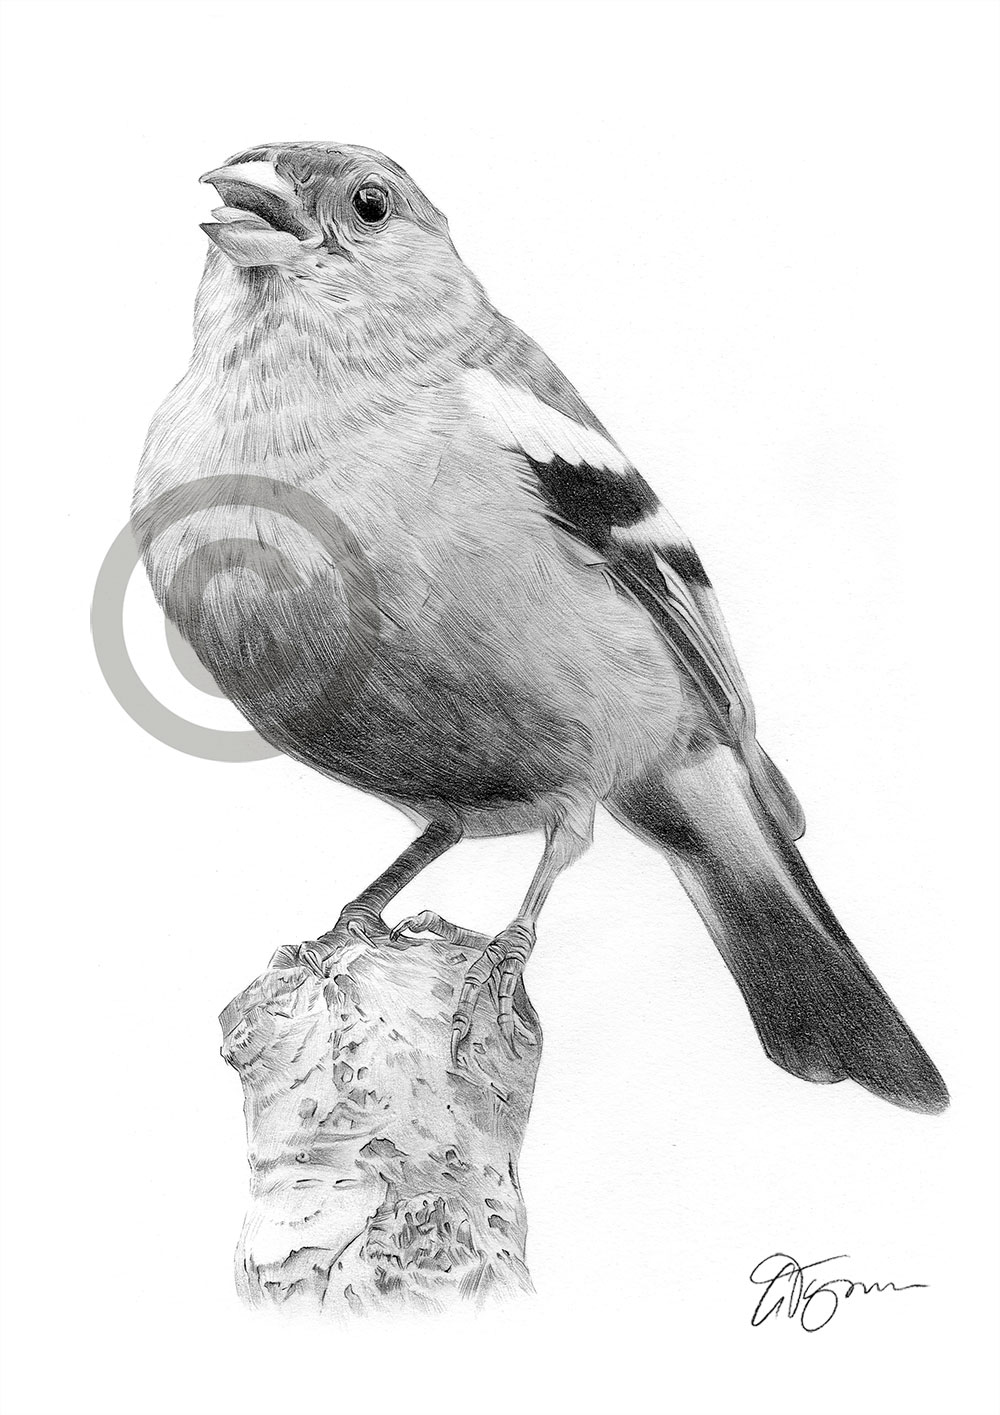 Pencil drawing of a chaffinch by artist Gary Tymon